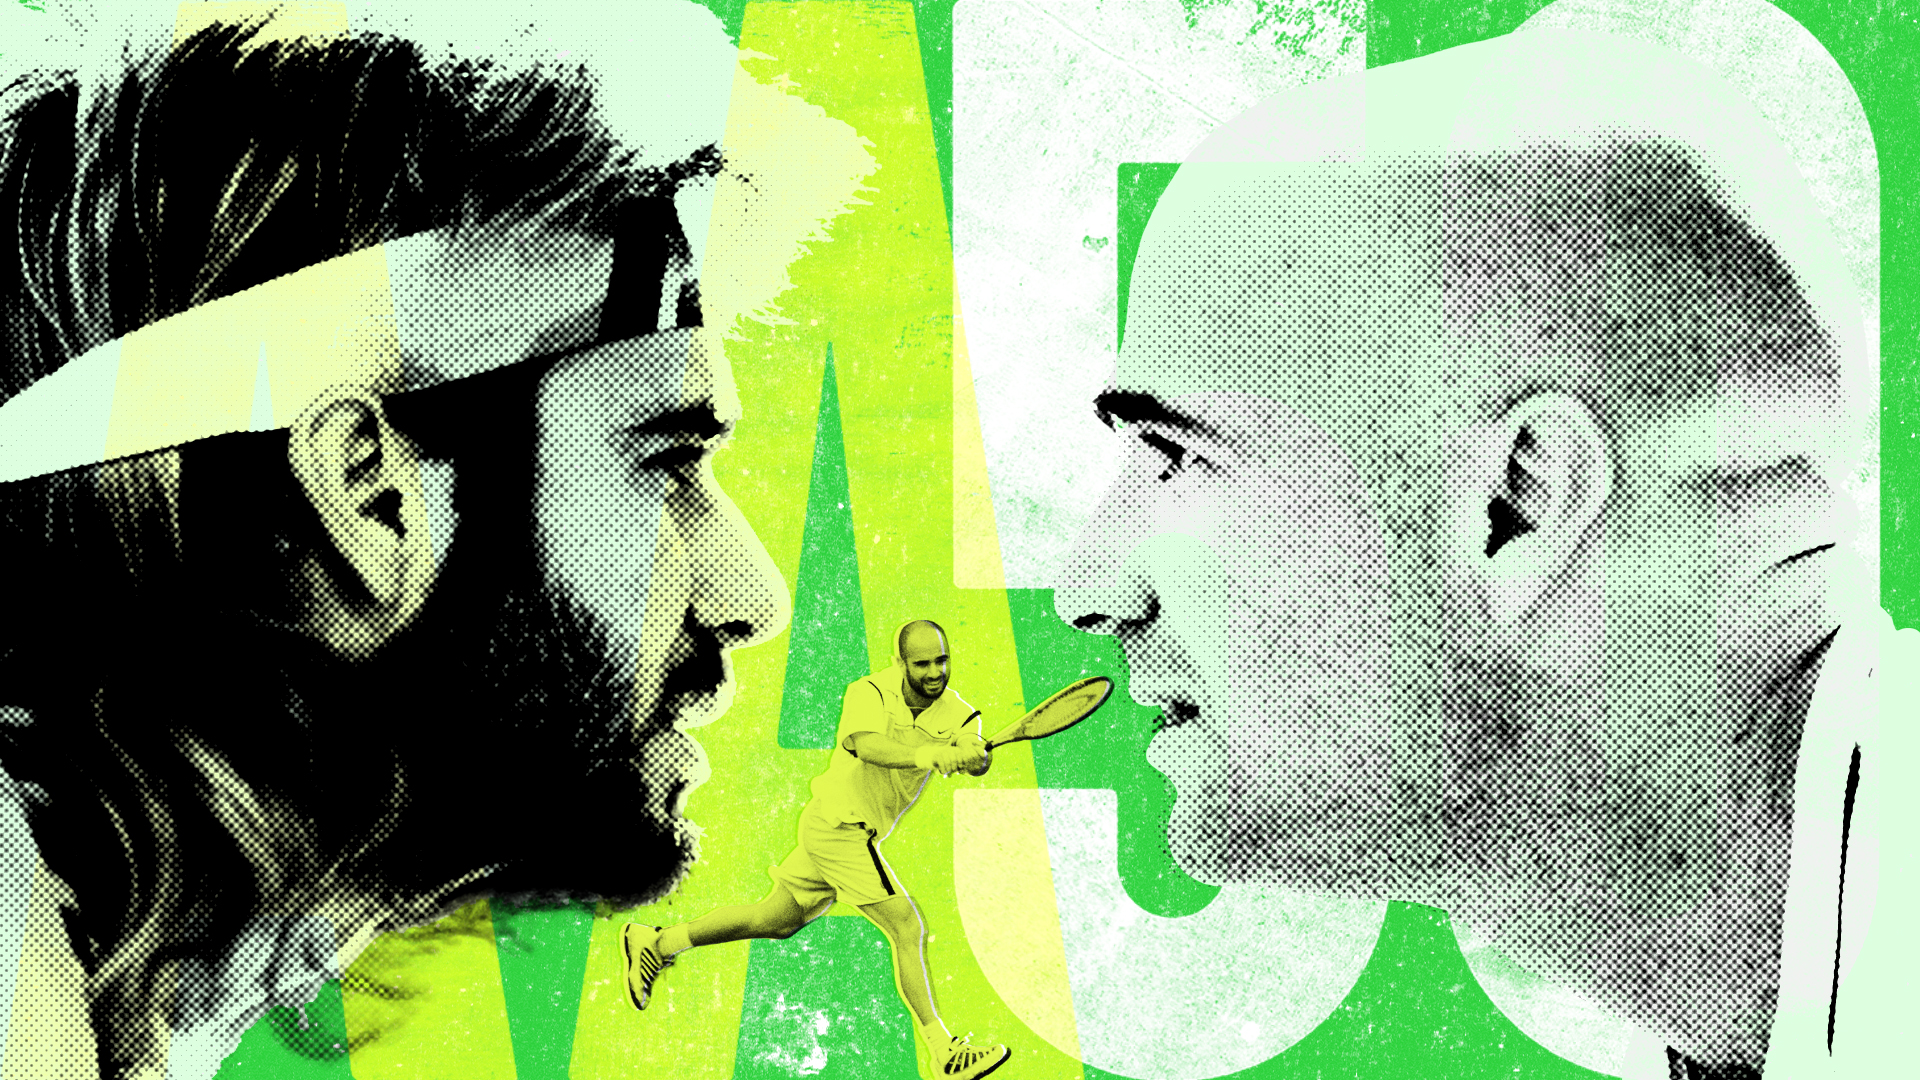 Andre Agassi Wallpapers